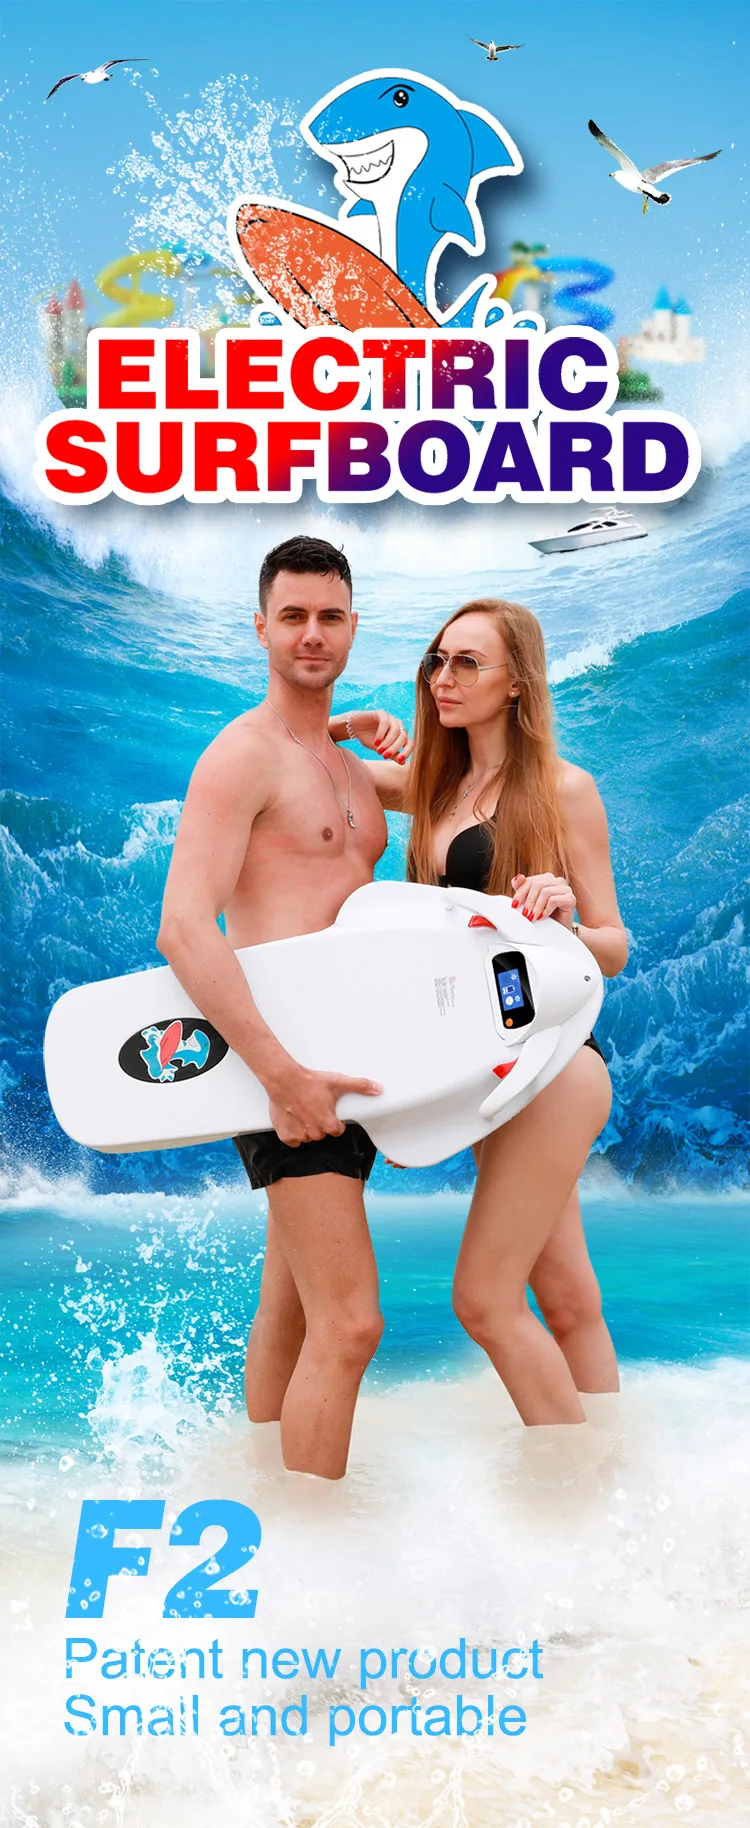 2023 YIDE Top Quality Adult Water Board Motor Electric Carbon Electric Surfboard For Swimming,Surfing,Lifesaving